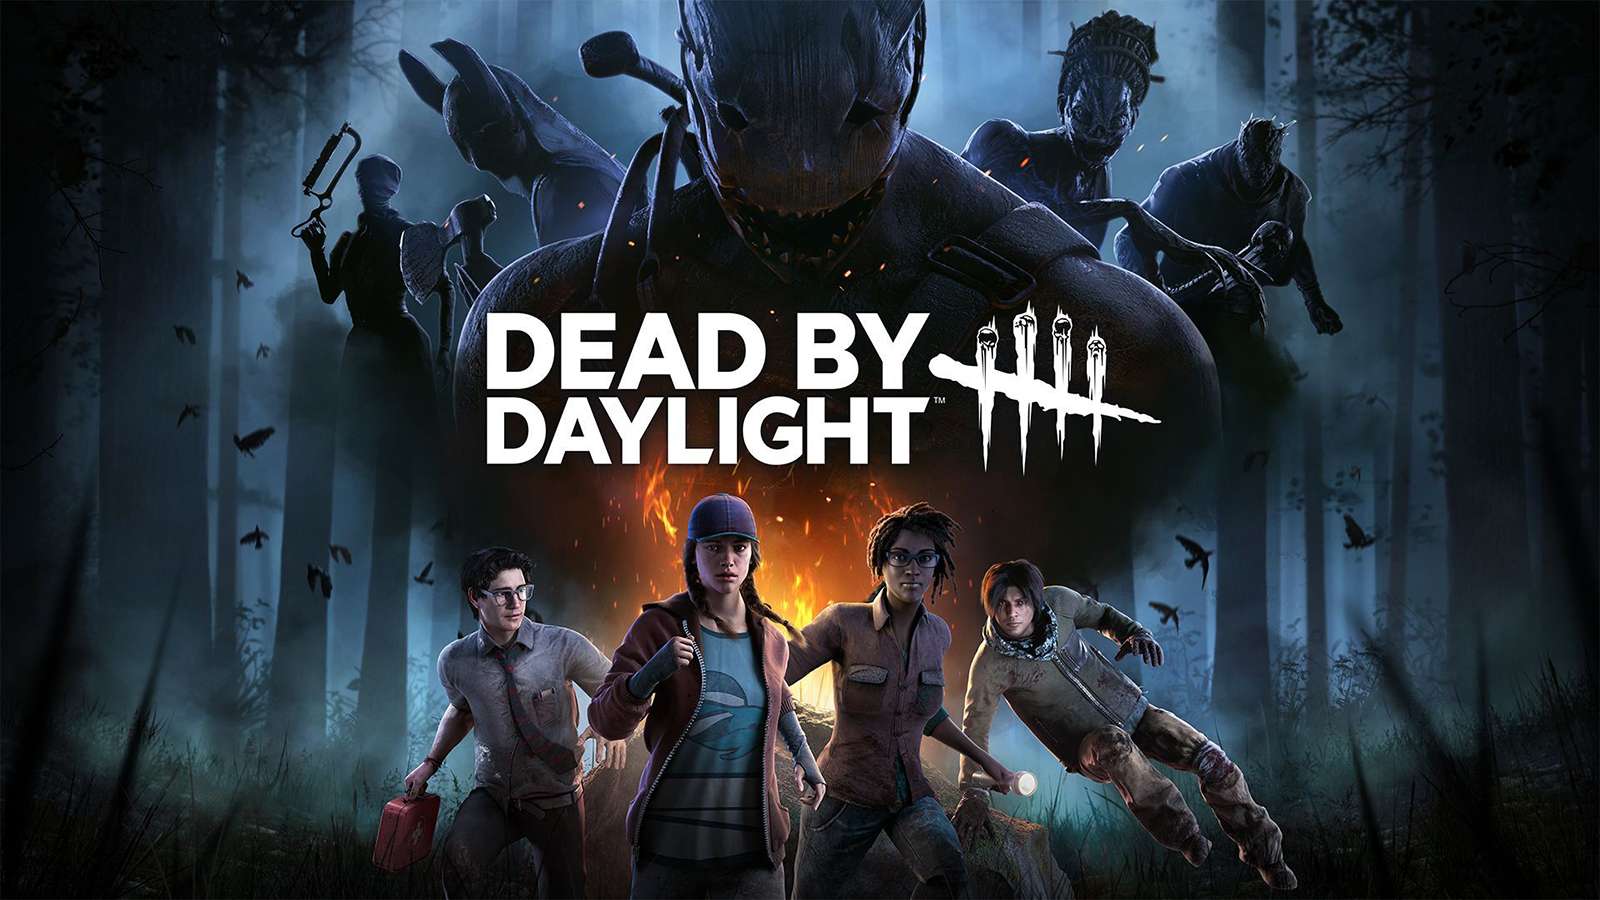 Key art for Dead by Daylight featuring Survivors and Killers